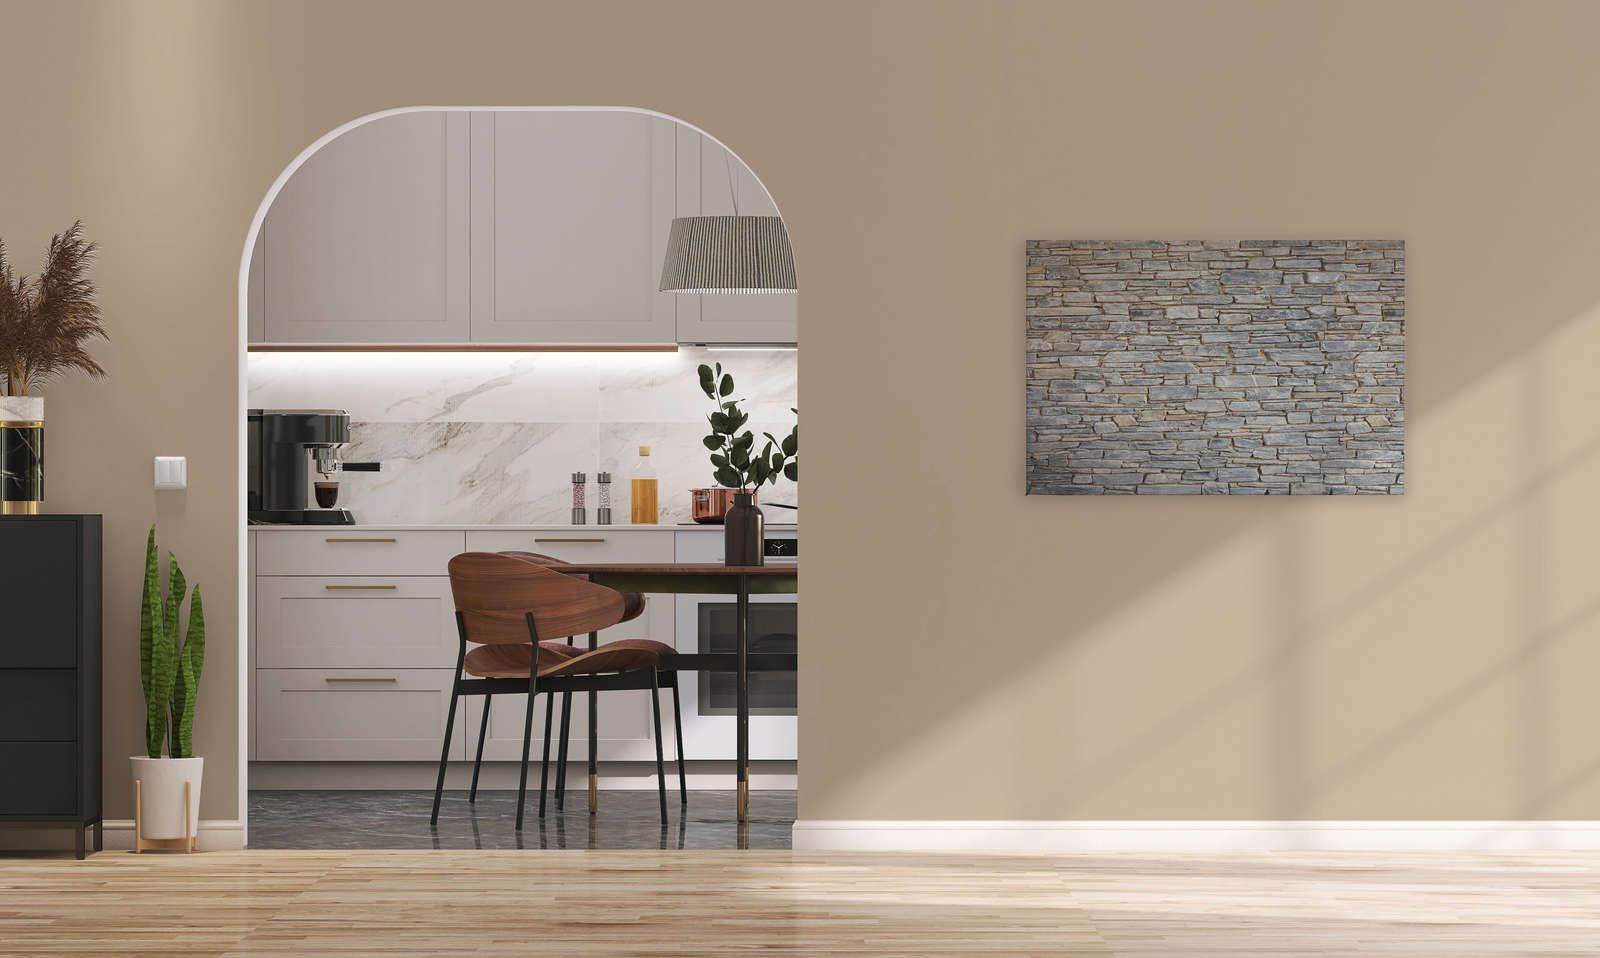             Stone Wall Canvas Painting Light Grey Nature Stone Look - 0.90 m x 0.60 m
        